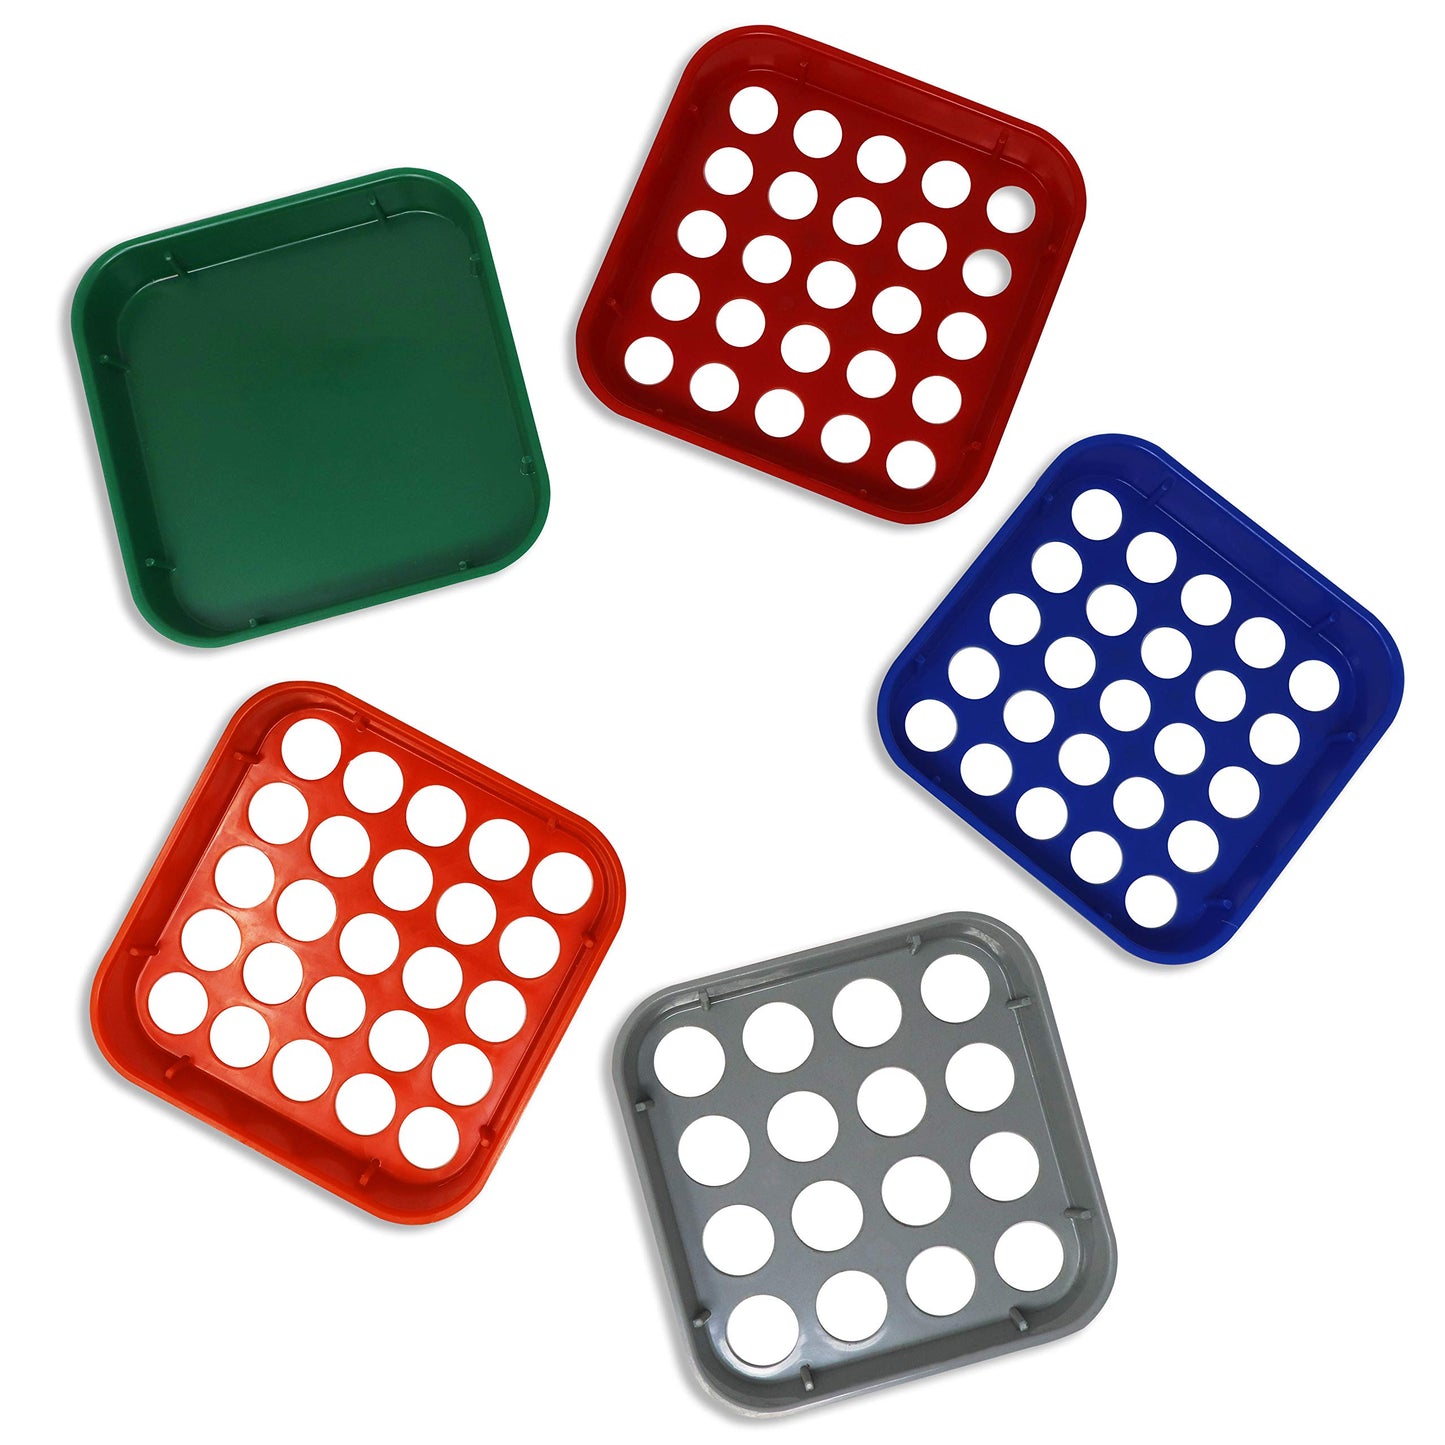 5 Quick Sort Coin Organizing and Sorting Trays Set